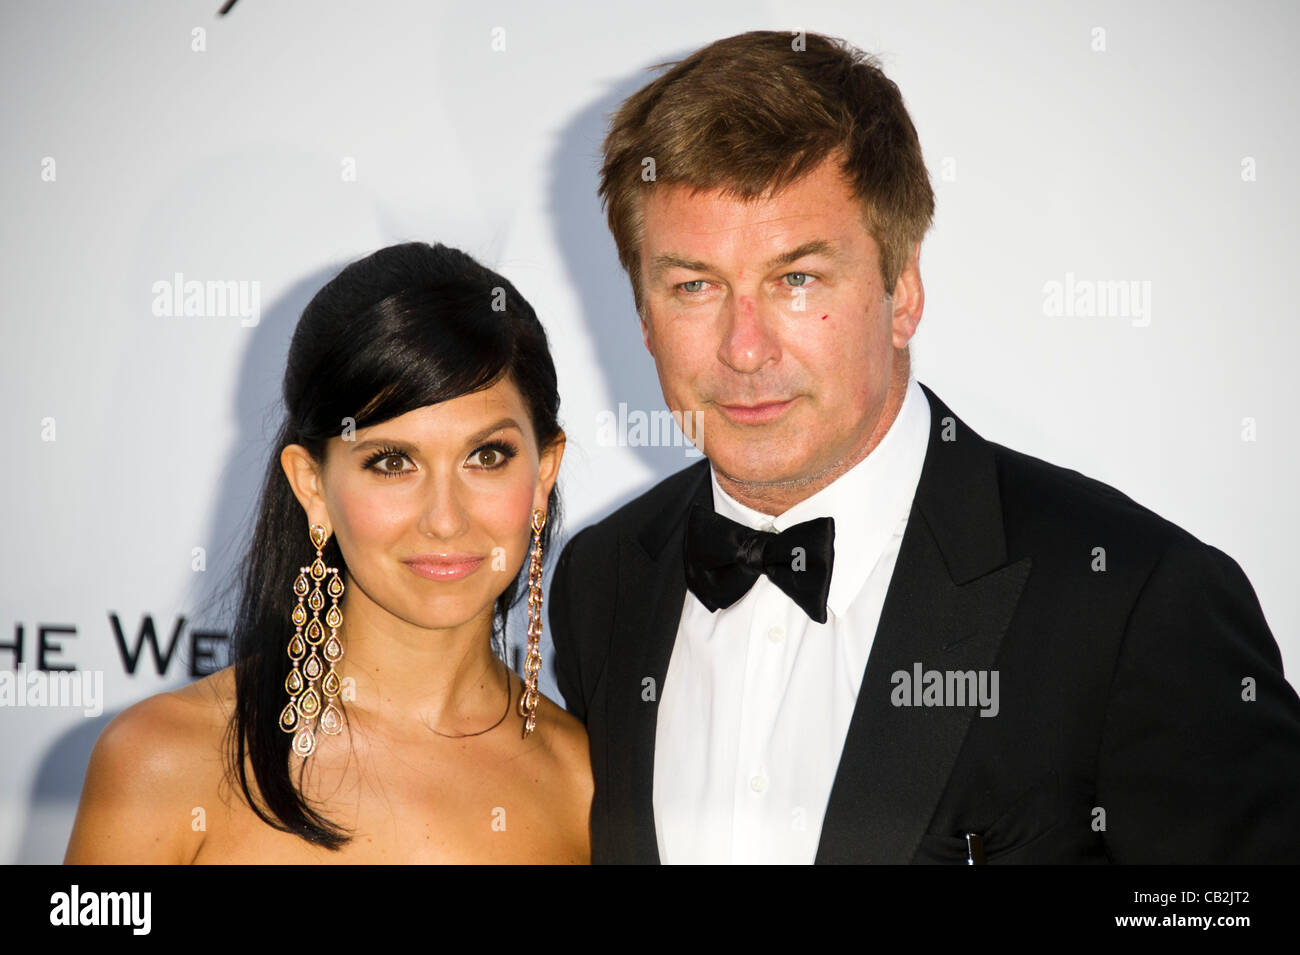 Alec Baldwin (actor) and girlfriend Hilaria Thomas at arrivals for the amfAR Cinema against AIDS charity auction 65th Cannes Film Festival 2012 Hotel du Cap-Eden-Roc, Antibes, France Thu 24 May 2012 Stock Photo